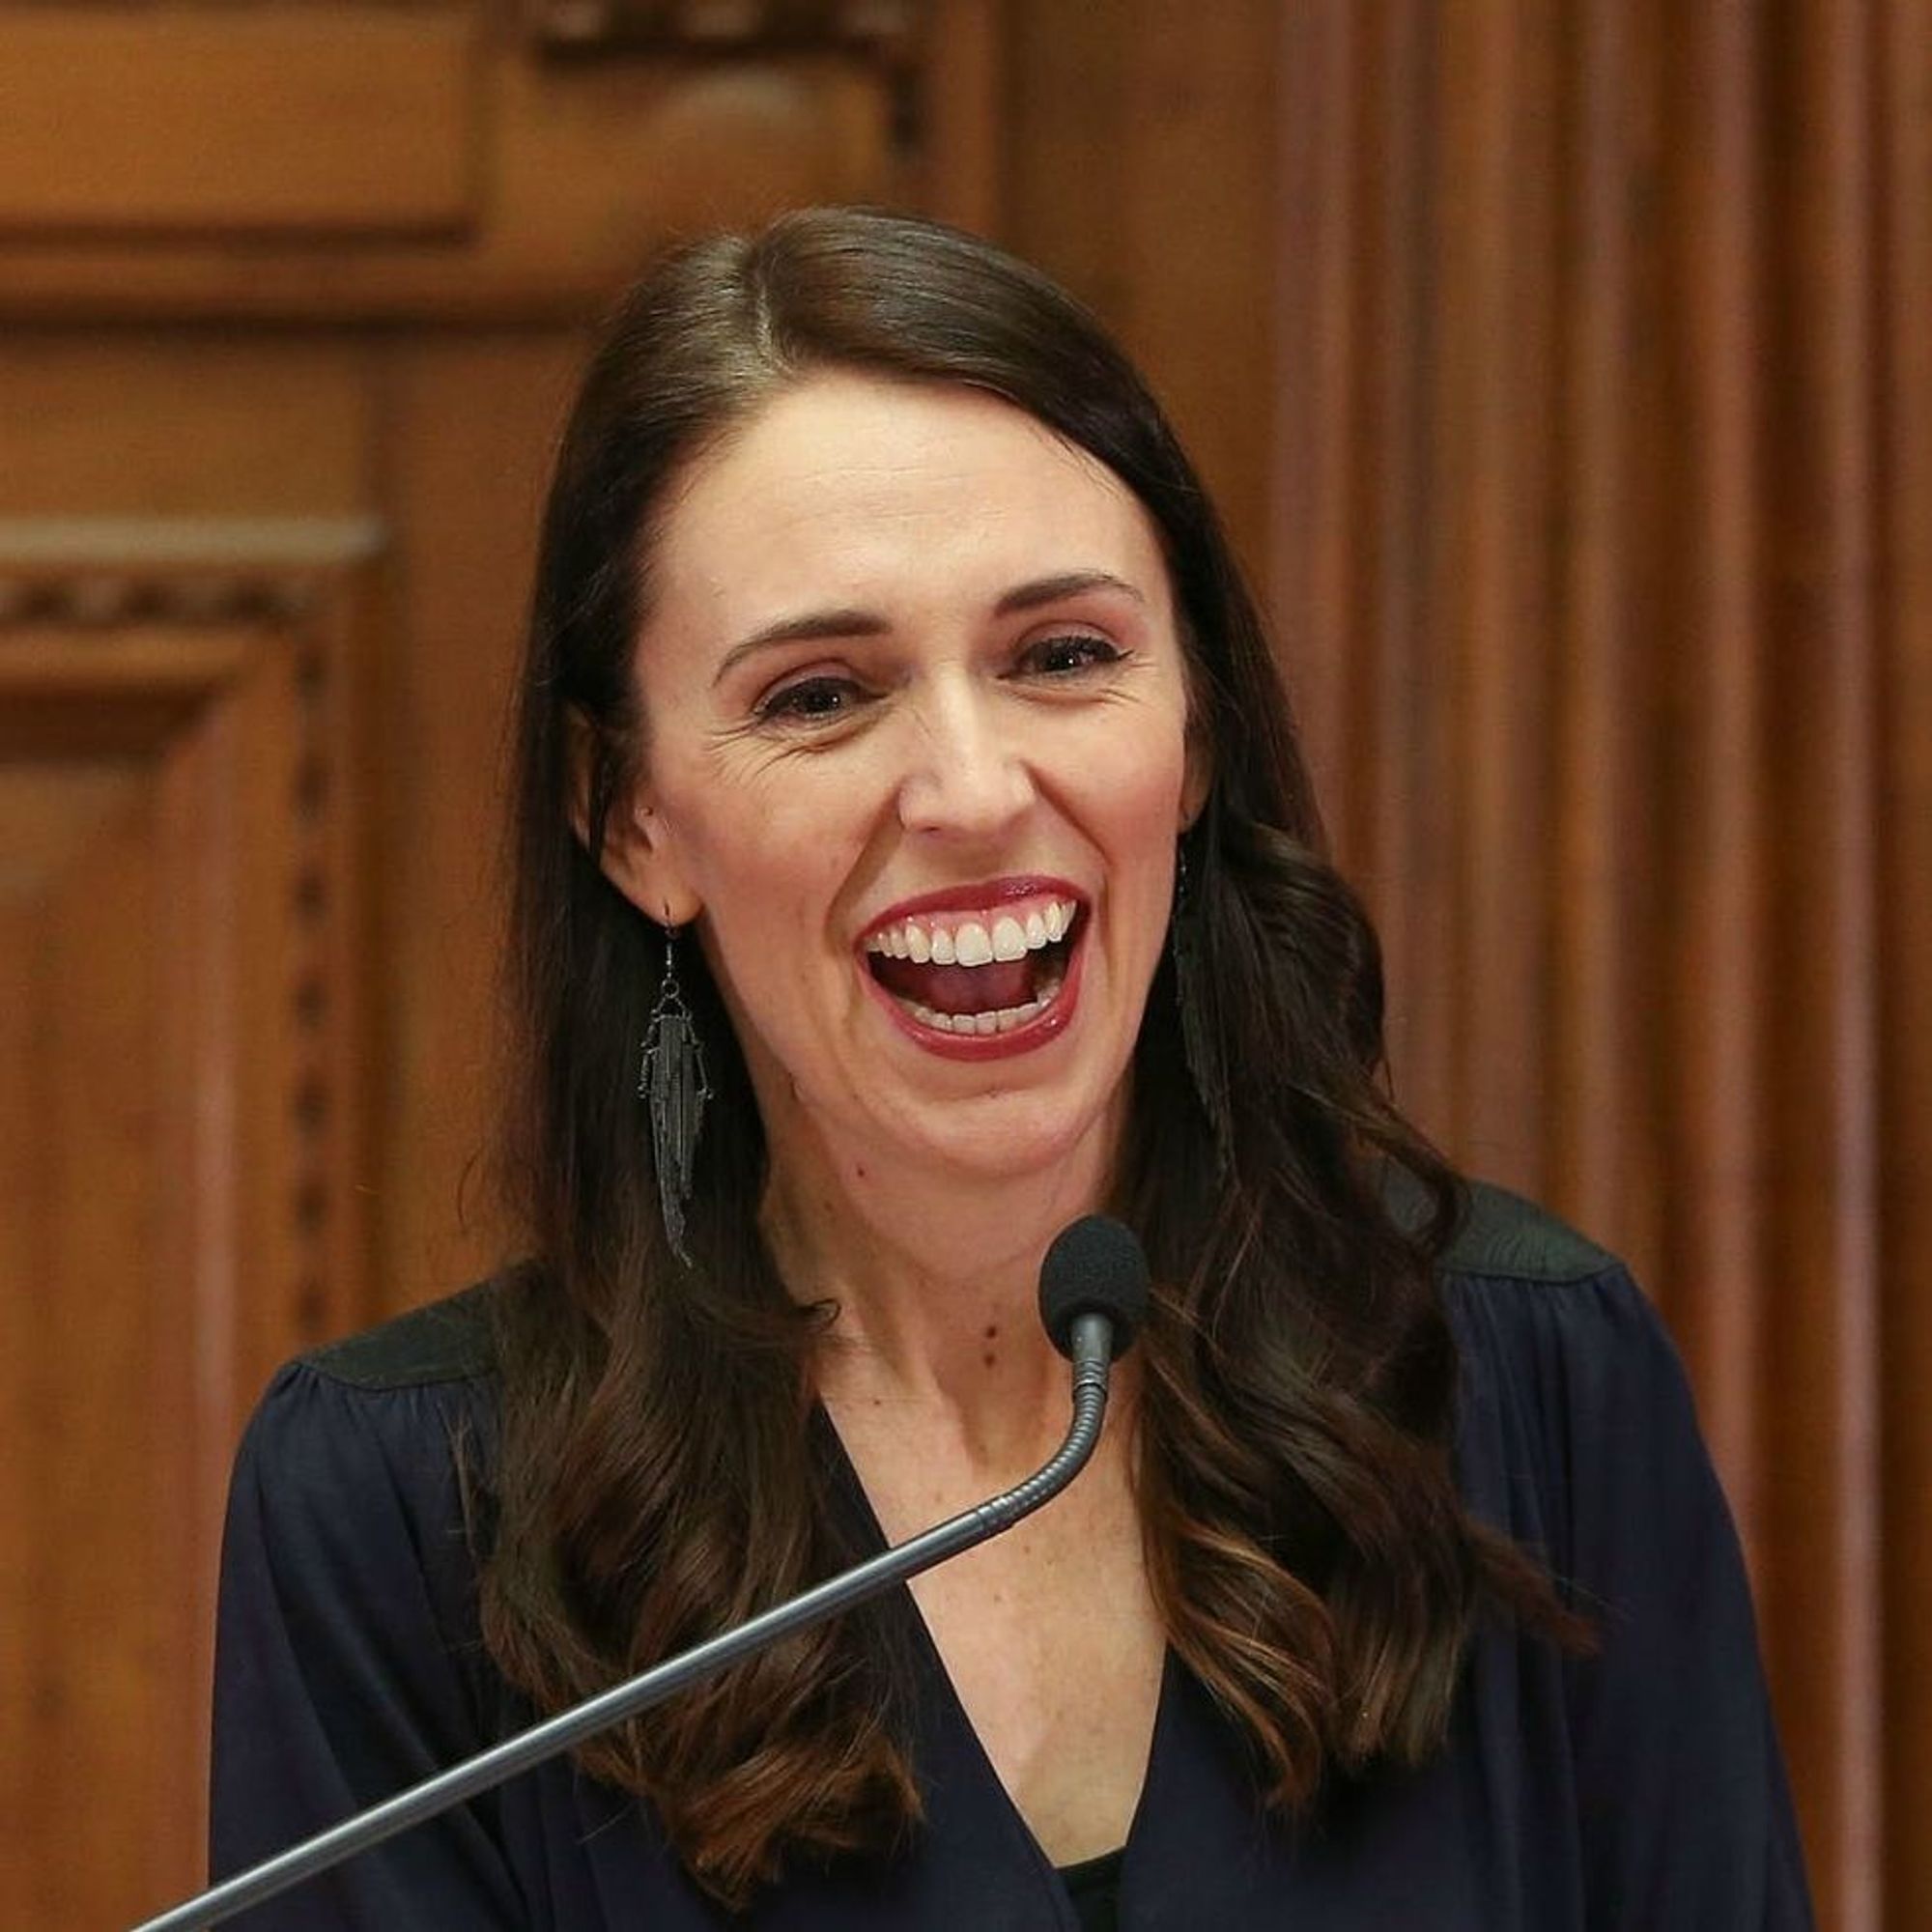 The Prime Minister of New Zealand Will Be the First World Leader in